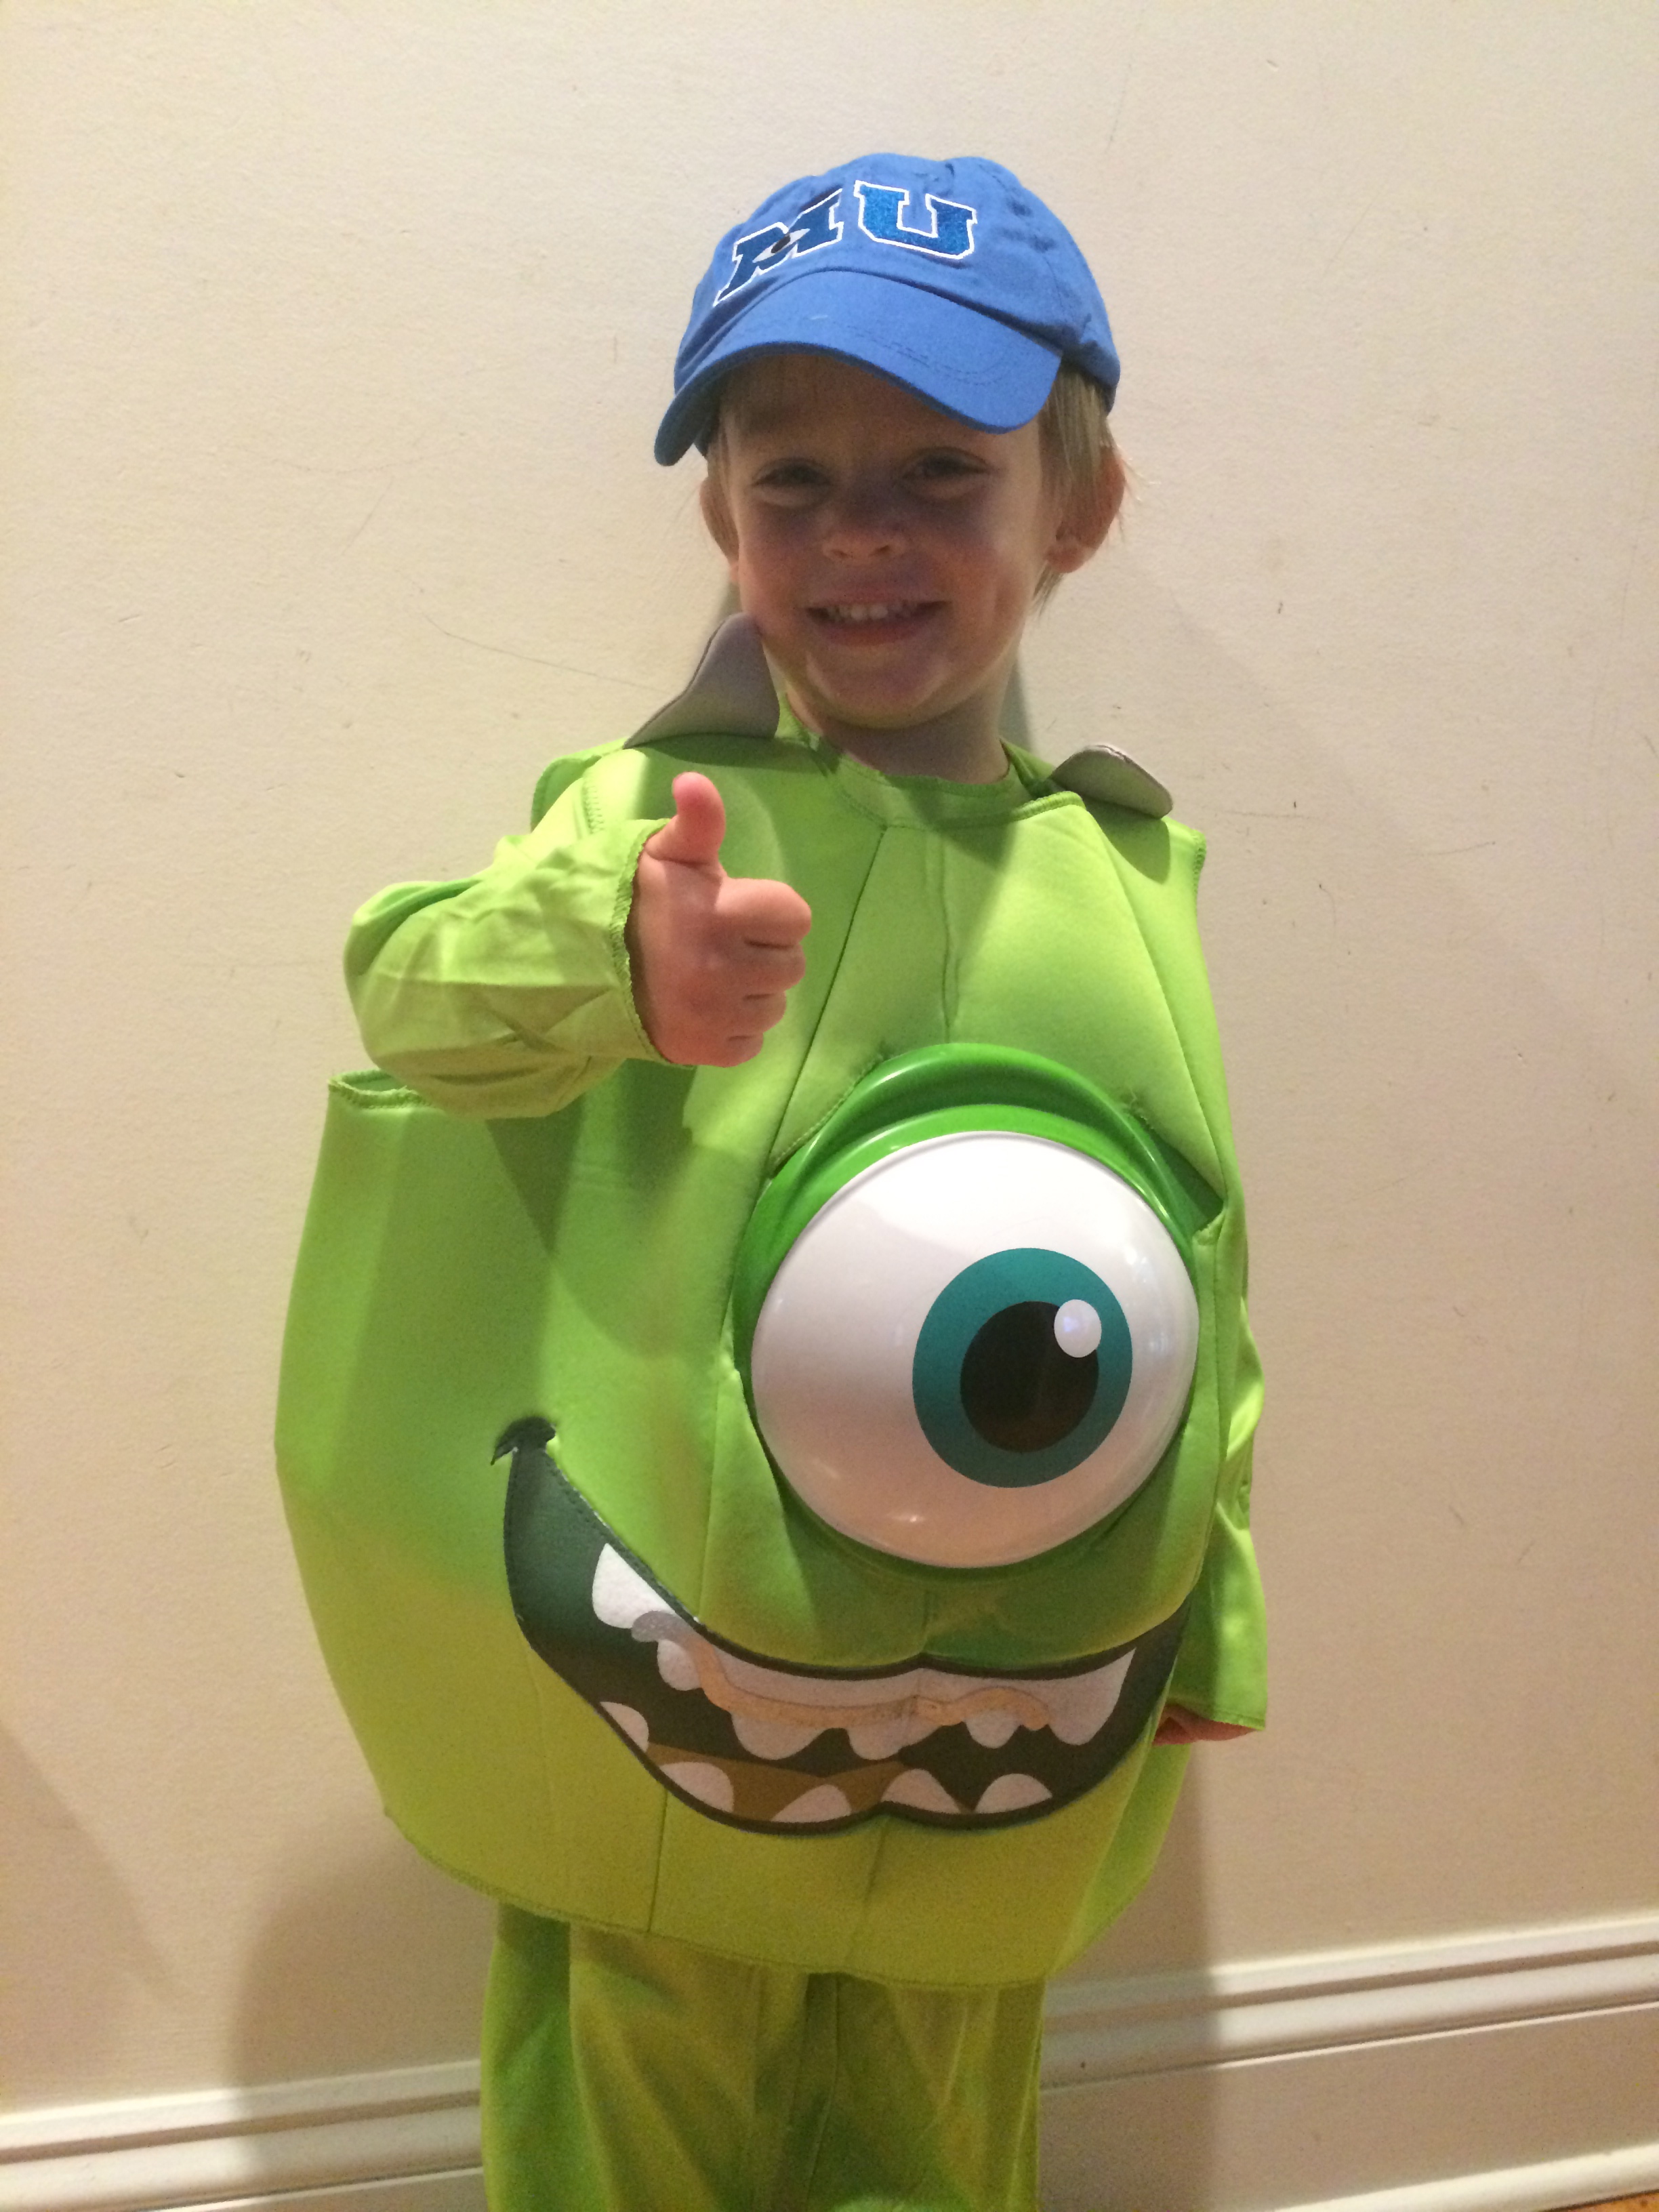 Doesn't Trevor look adorable in his Mike costume?